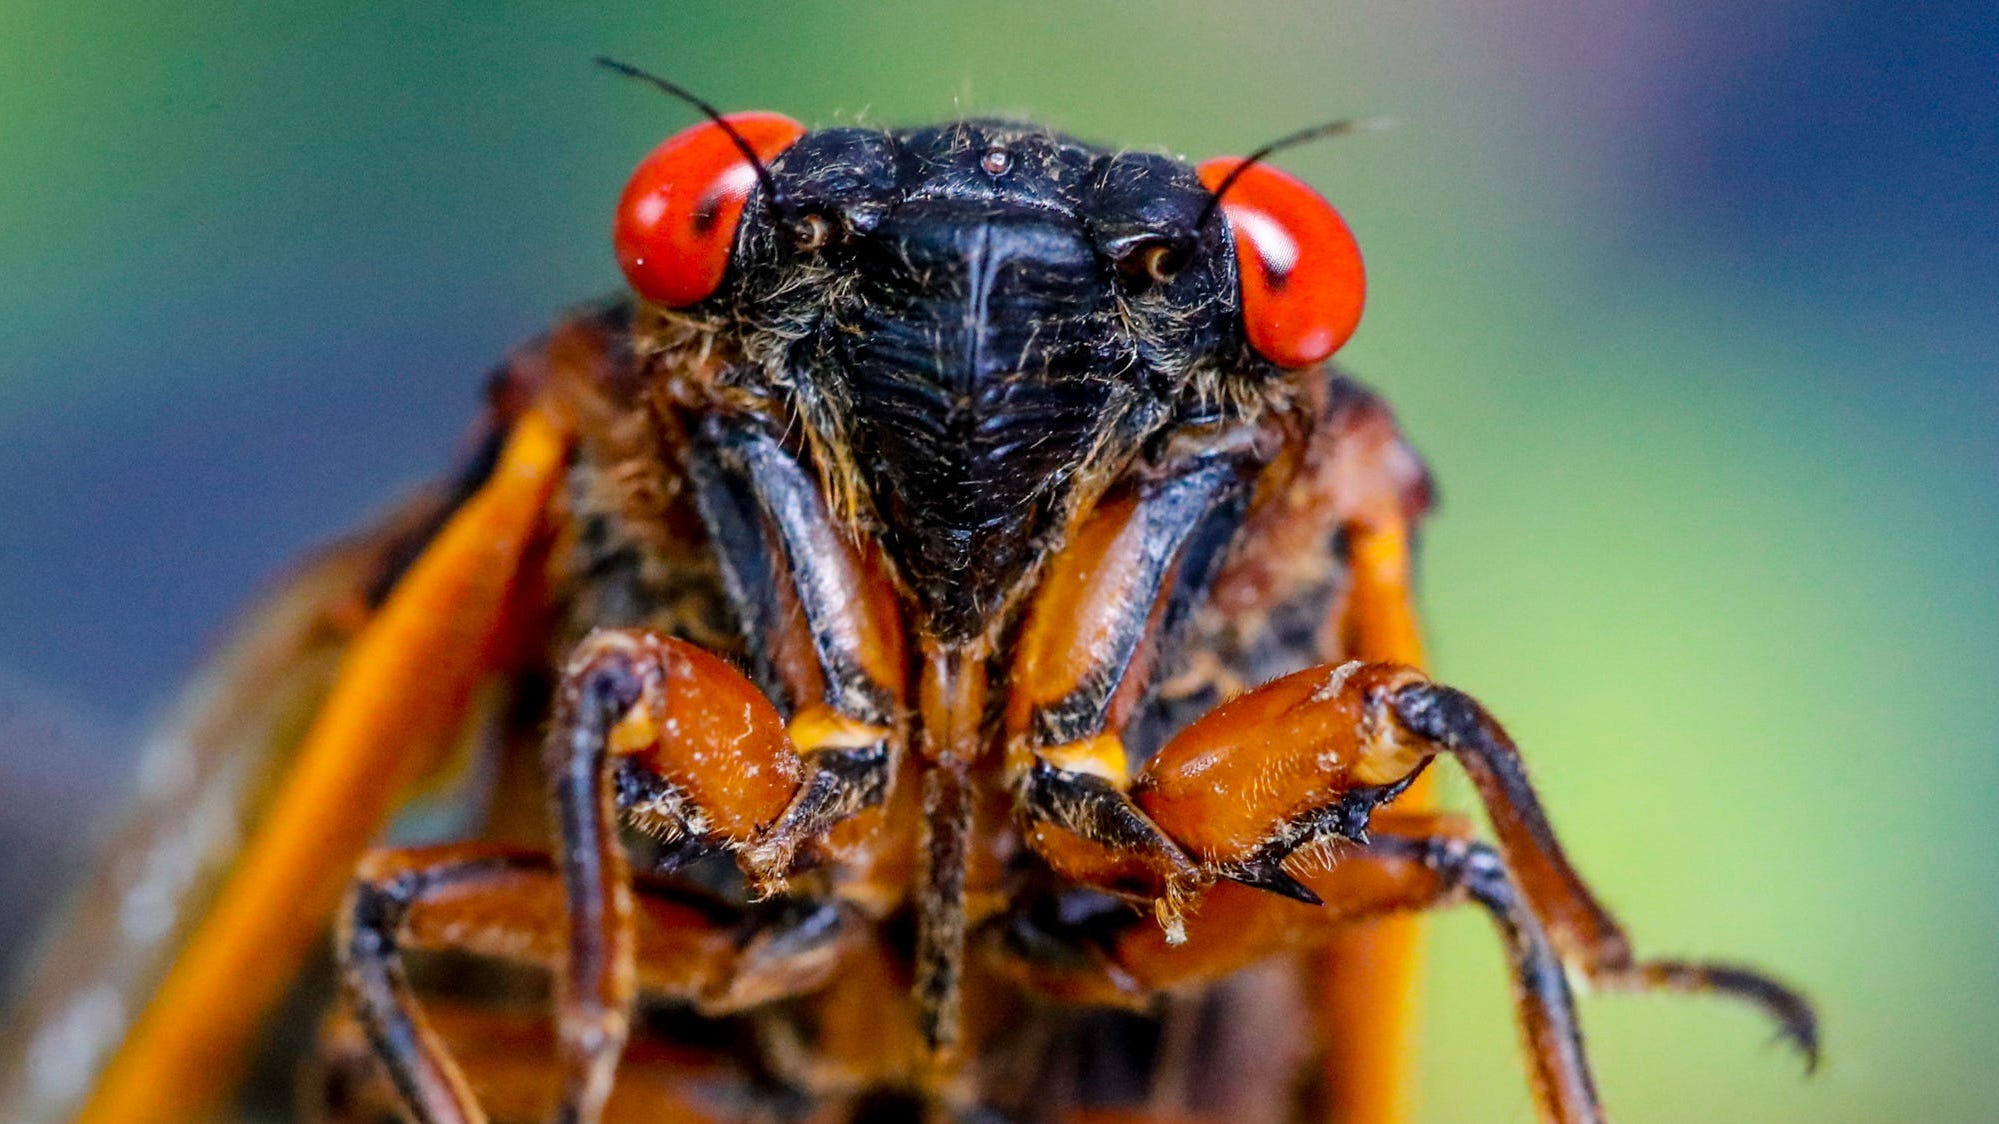 Cicada 'roar': Concerned SC residents call police. What to know about cicada emergence.